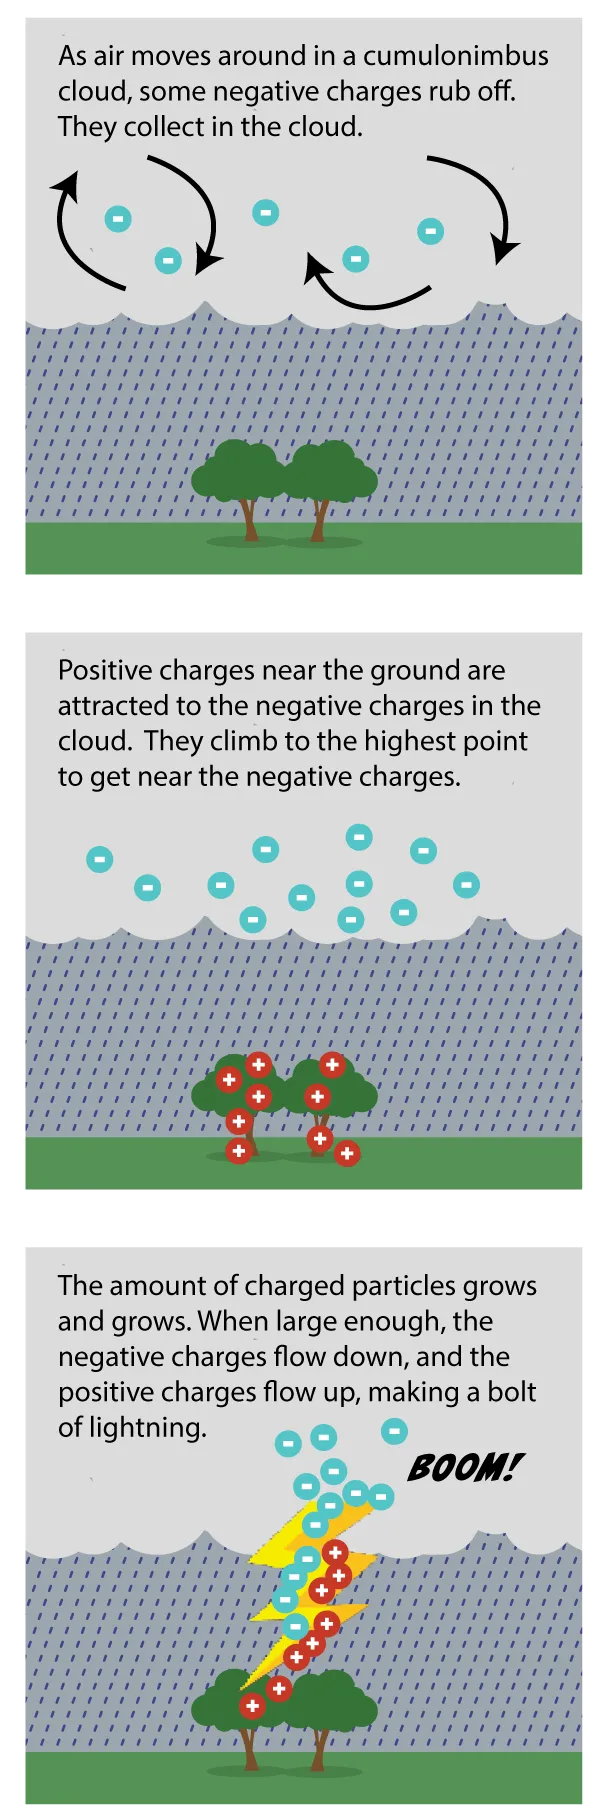 Graphic showing how lightning forms. As air moves around in a cumlonimbus cloud, some negative charges rub off. They collect in the cloud. Positive charges near the ground are attracted to the negative charges in the cloud.  They climb to the highest point to get near the negative charges. The amount of charged particles grows and grows. When large enough, the negative charges flow down, and the positive charges flow up, making a bolt of lightning.